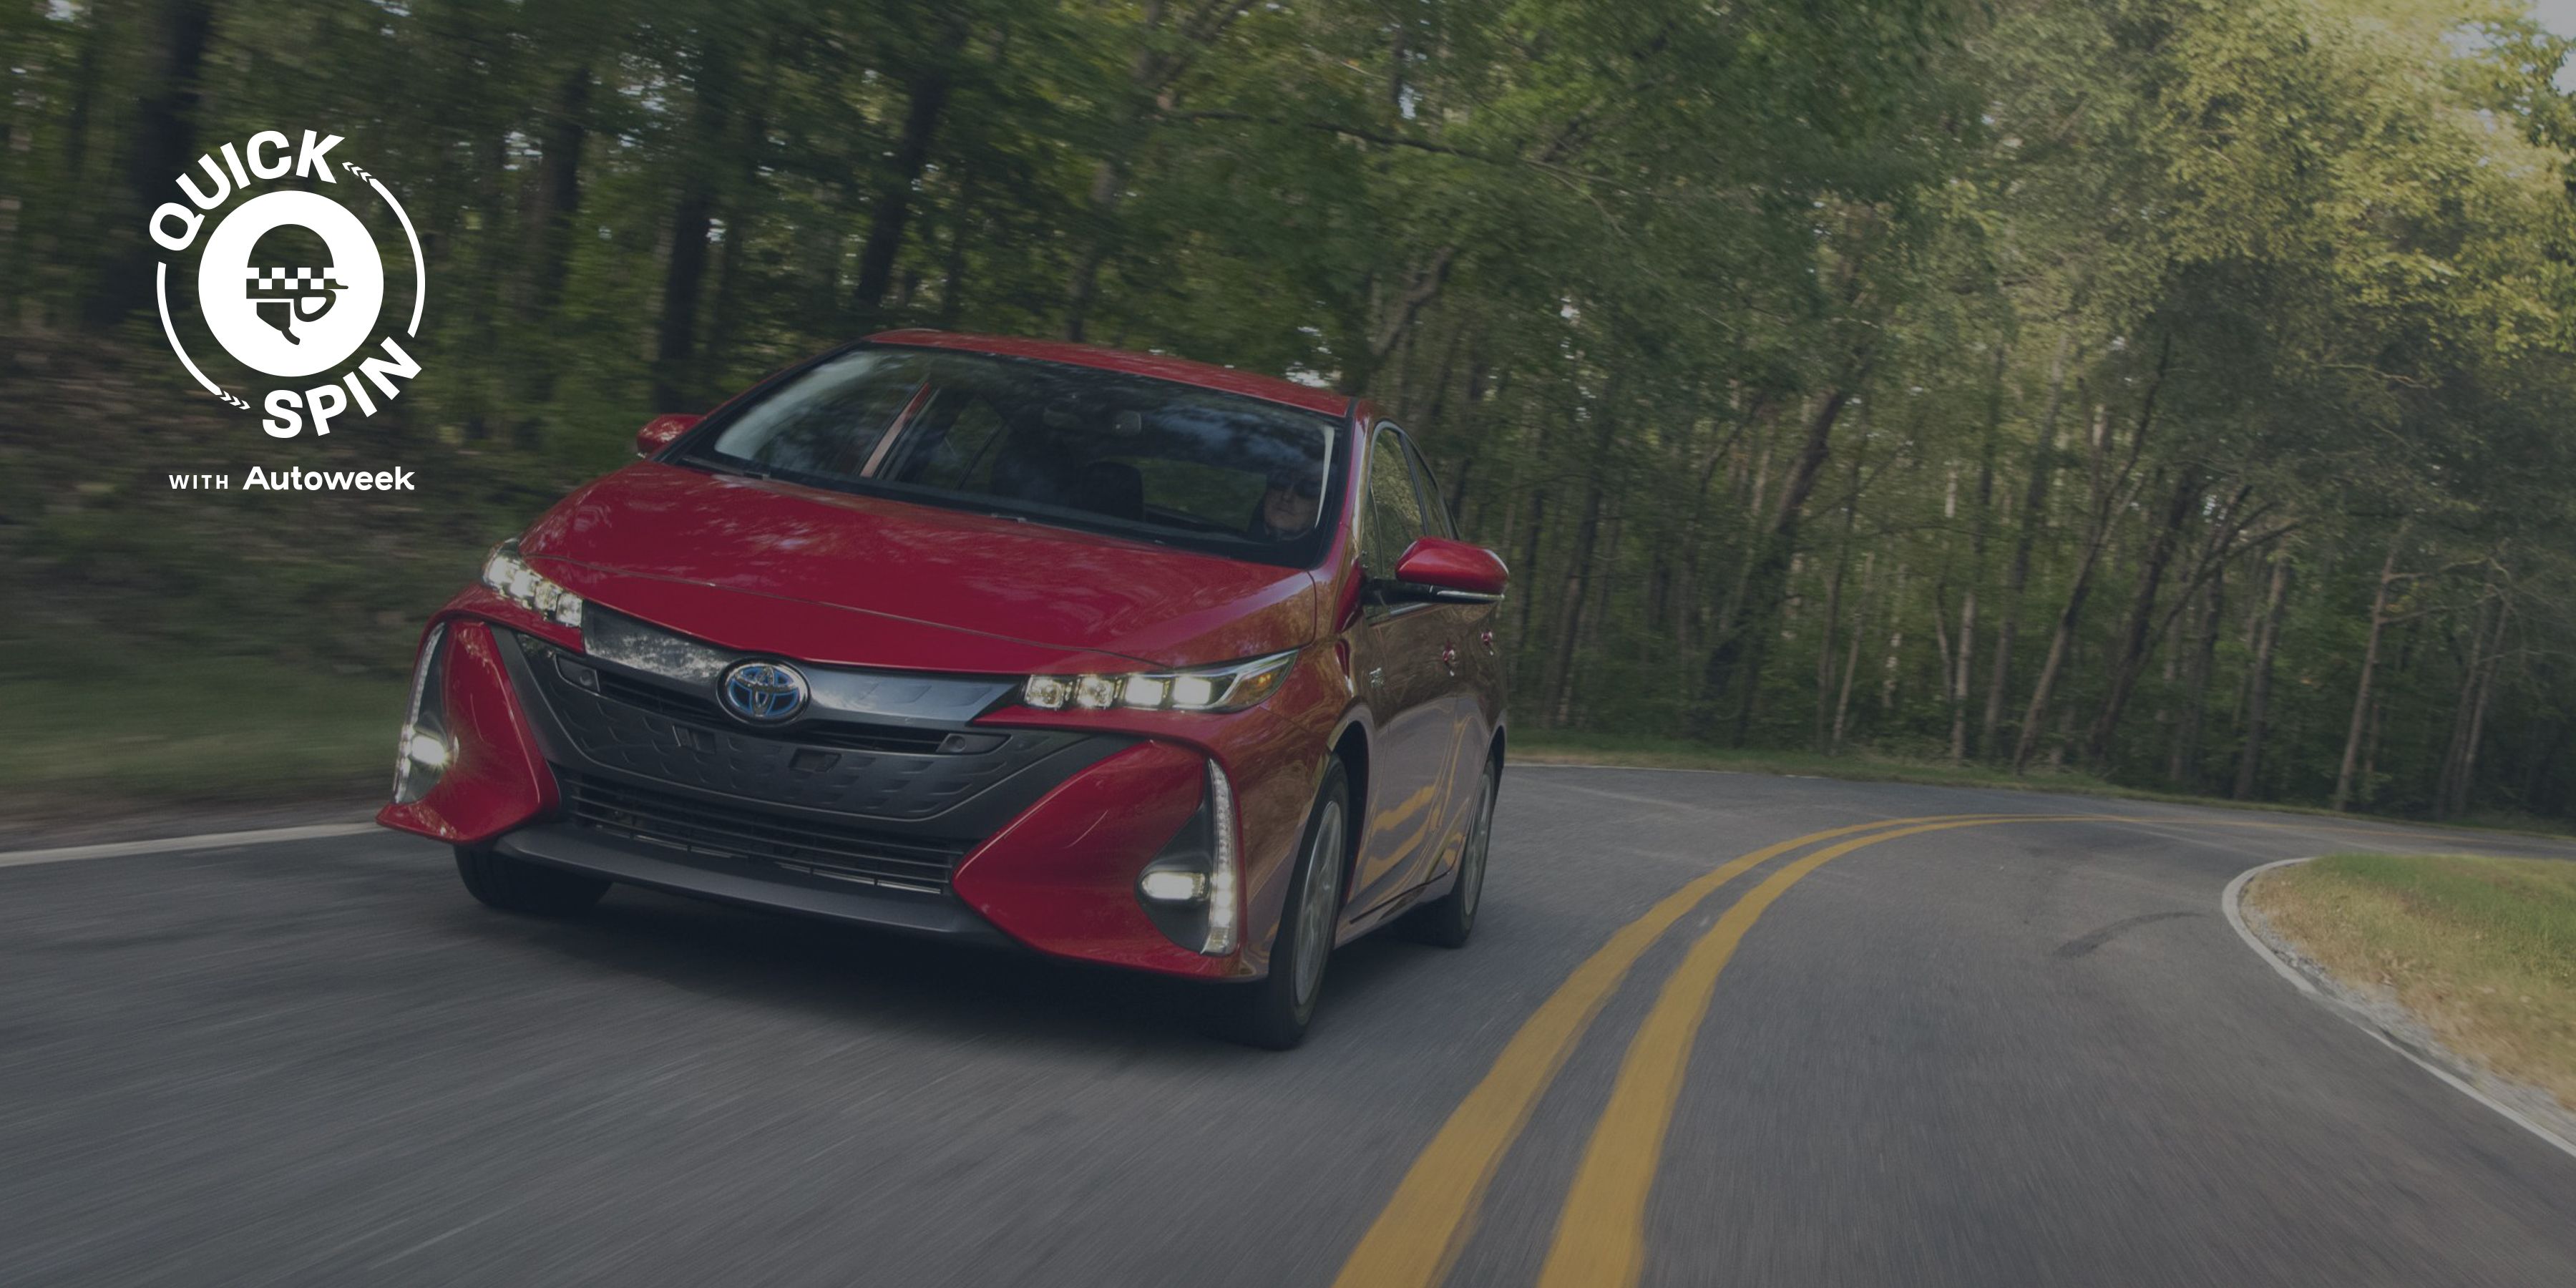 The Toyota Prius and Toyota Sequoia Are Birds of a Feather